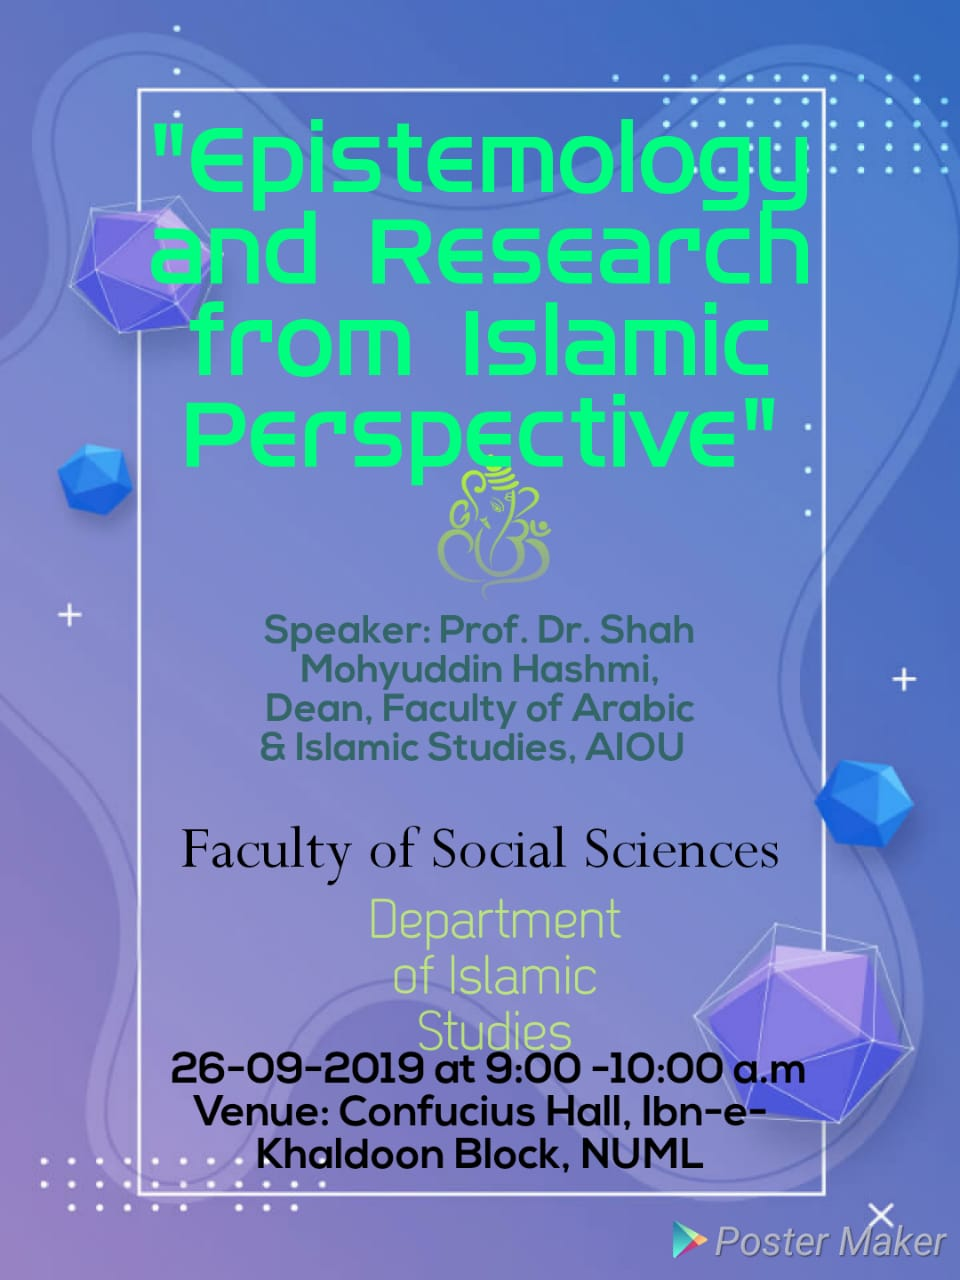 Seminar on "Epistemology and Research from Islamic Perspective